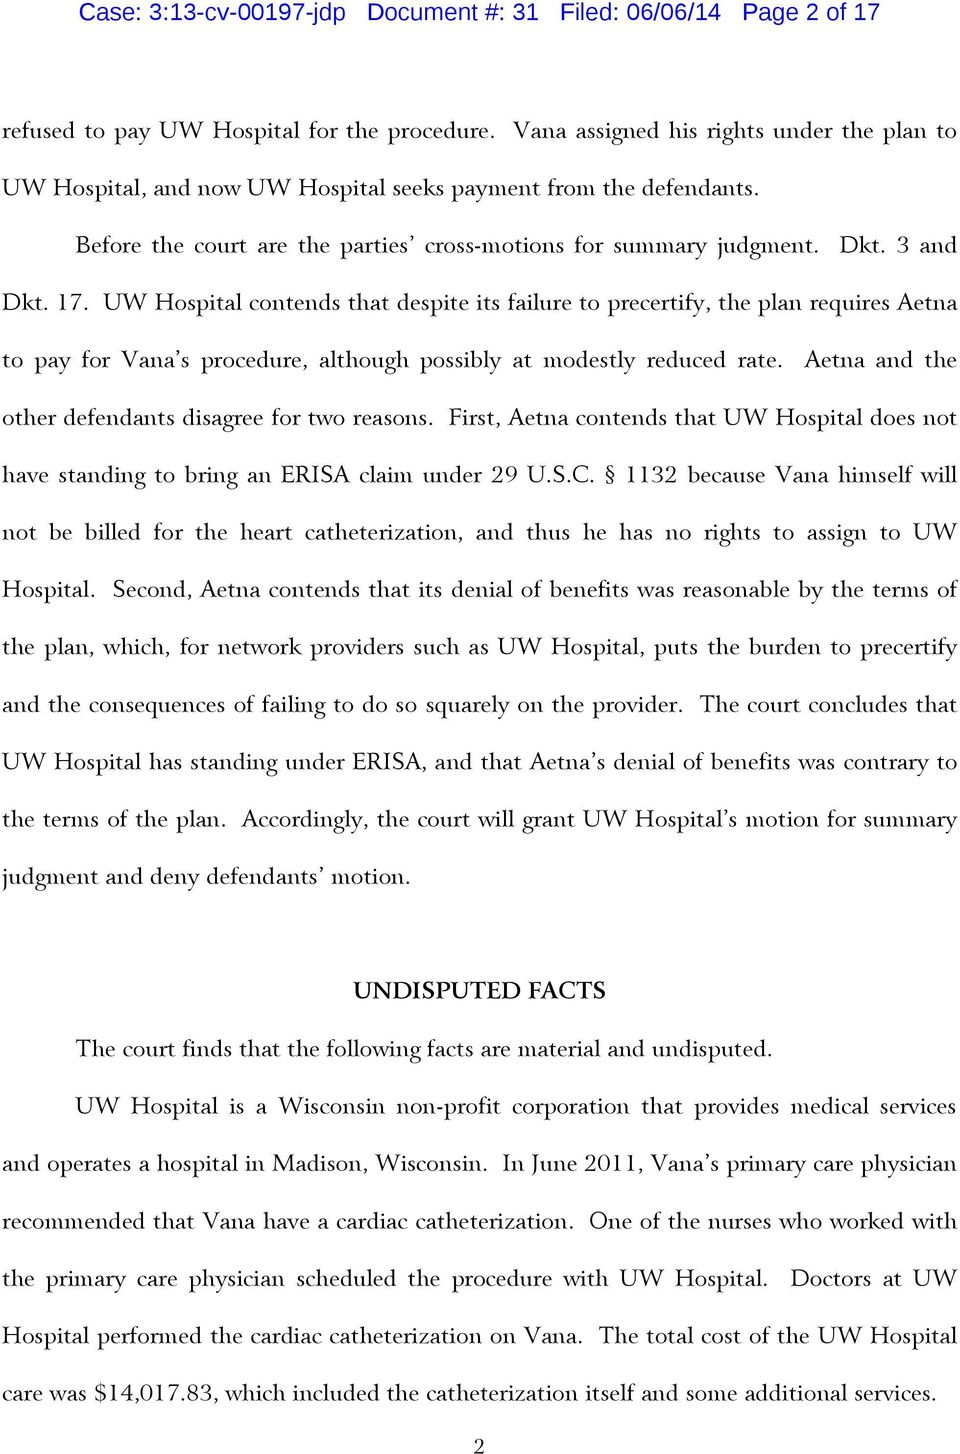 UW Hospital contends that despite its failure to precertify, the plan requires Aetna to pay for Vana s procedure, although possibly at modestly reduced rate.